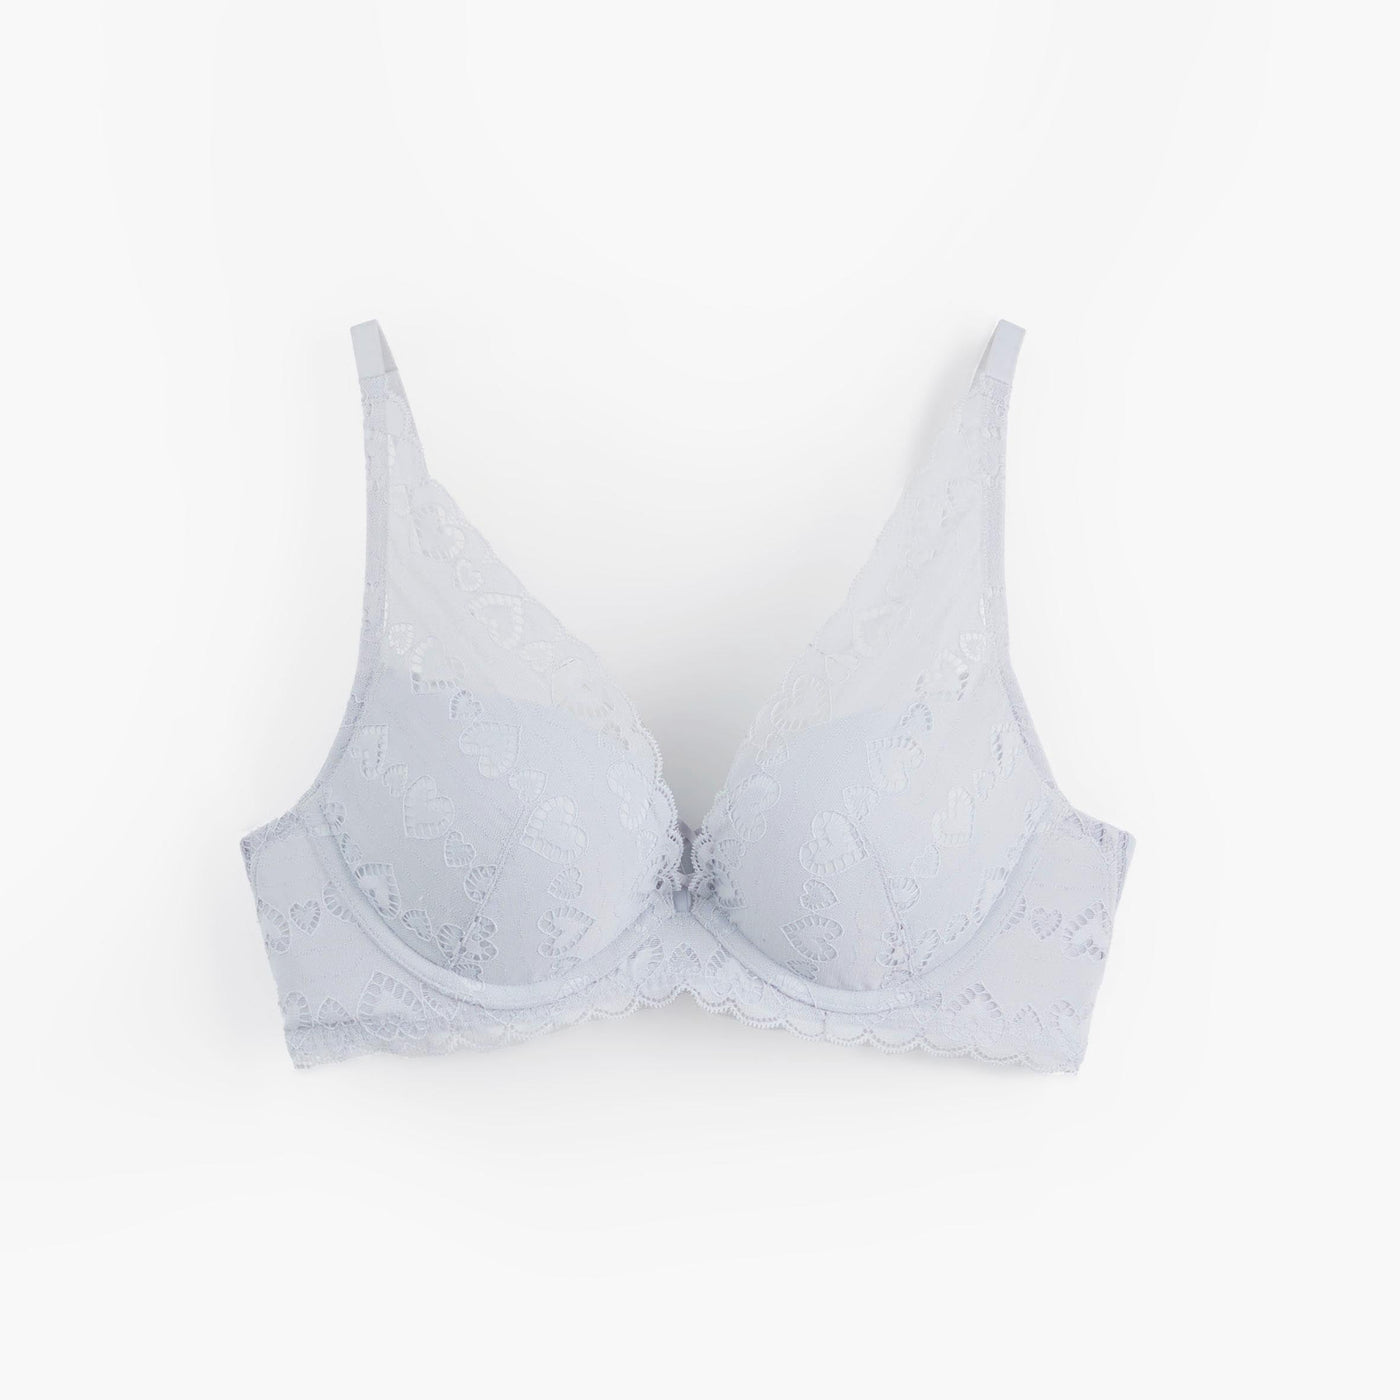 Stylist Memory Foam Plunge Push Up Lace Bra Her own words Gray Dawn 70A 